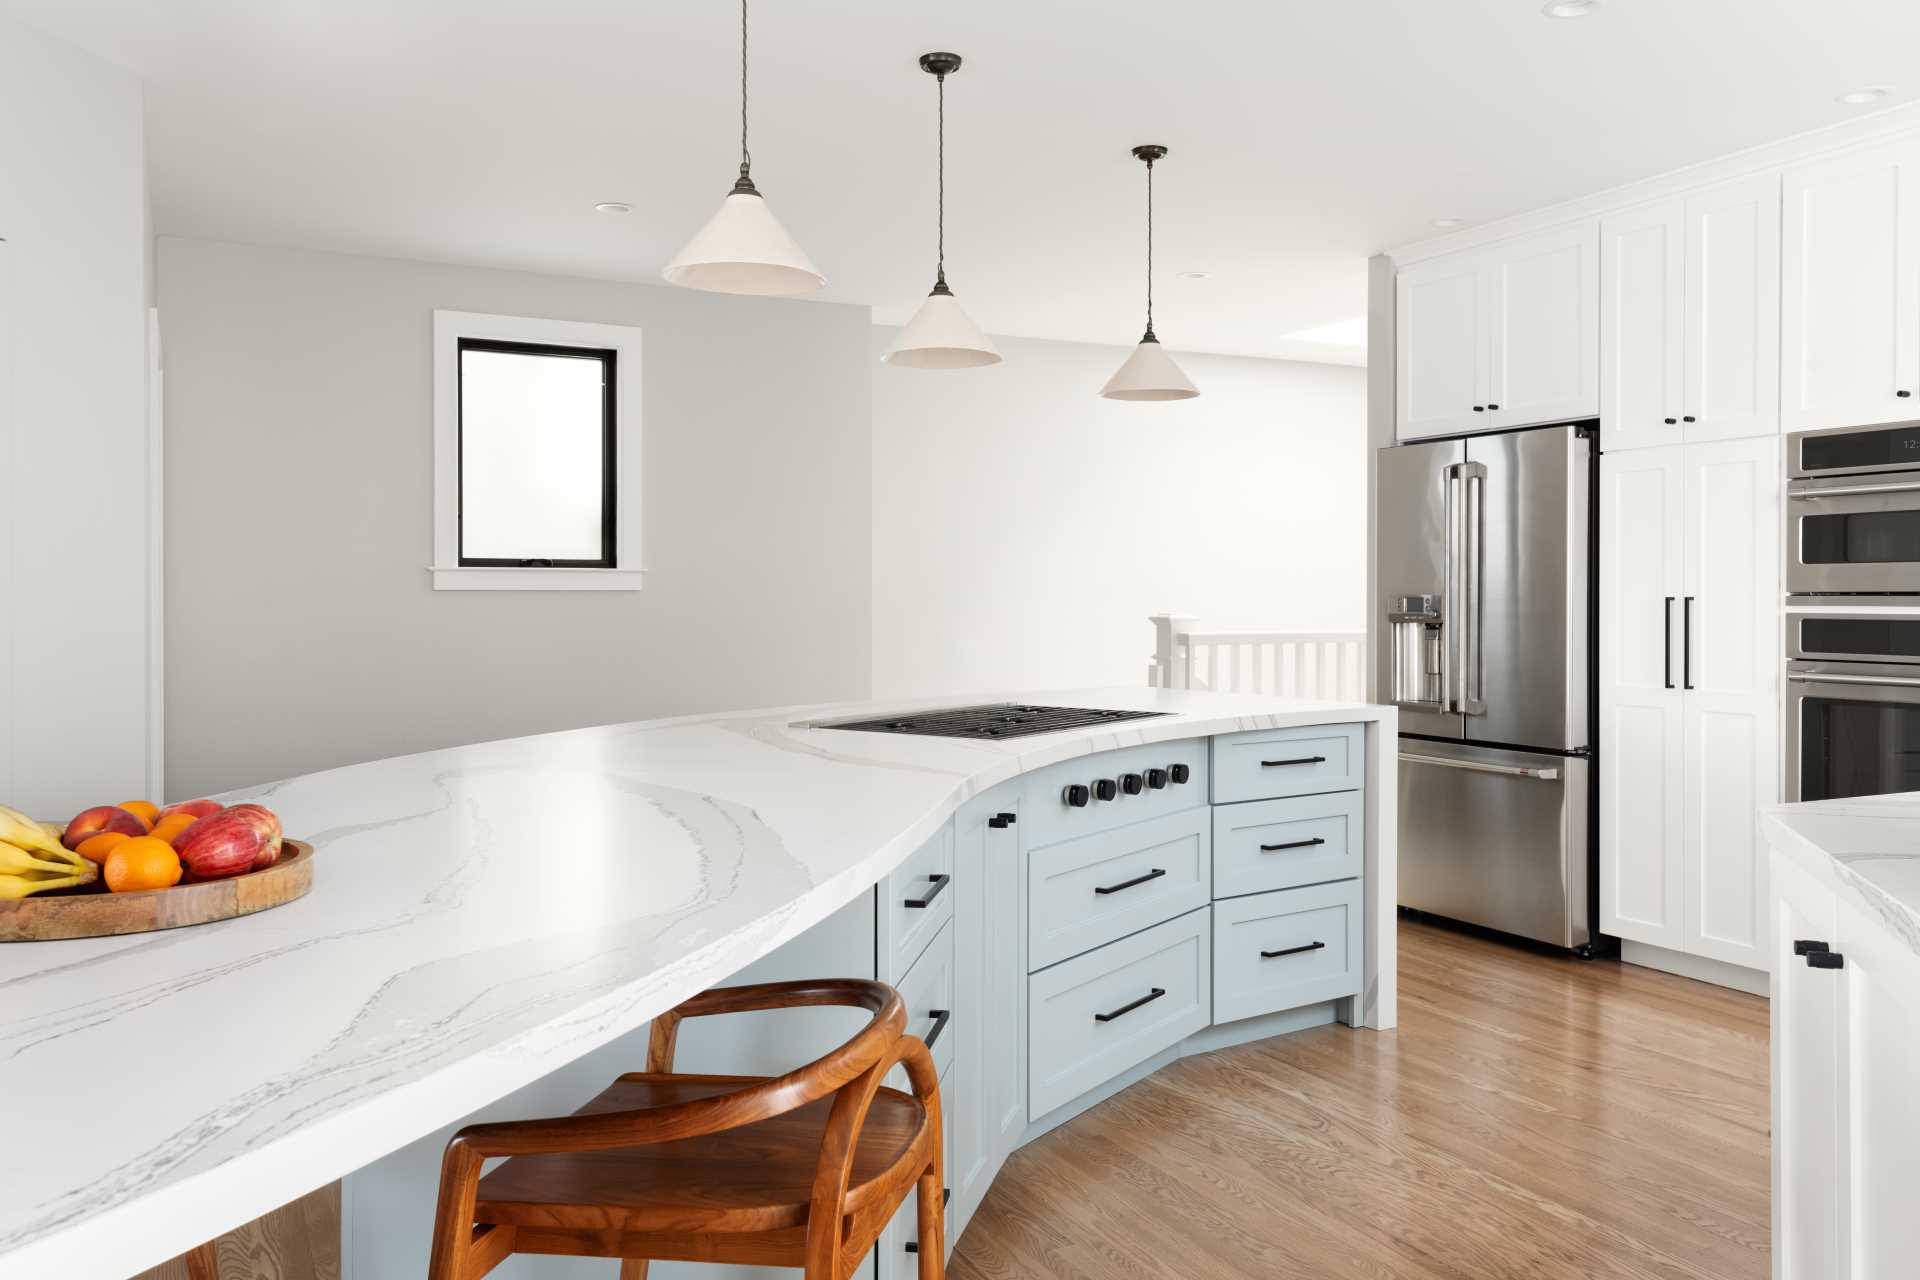 A hint of color has been added in this kitchen with lower cabinets in the island, while a down draft, telescoping hood allows the range to be placed in the serpentine island. The shape of the kitchen island also allows for a section of it to be dedicated to seating.